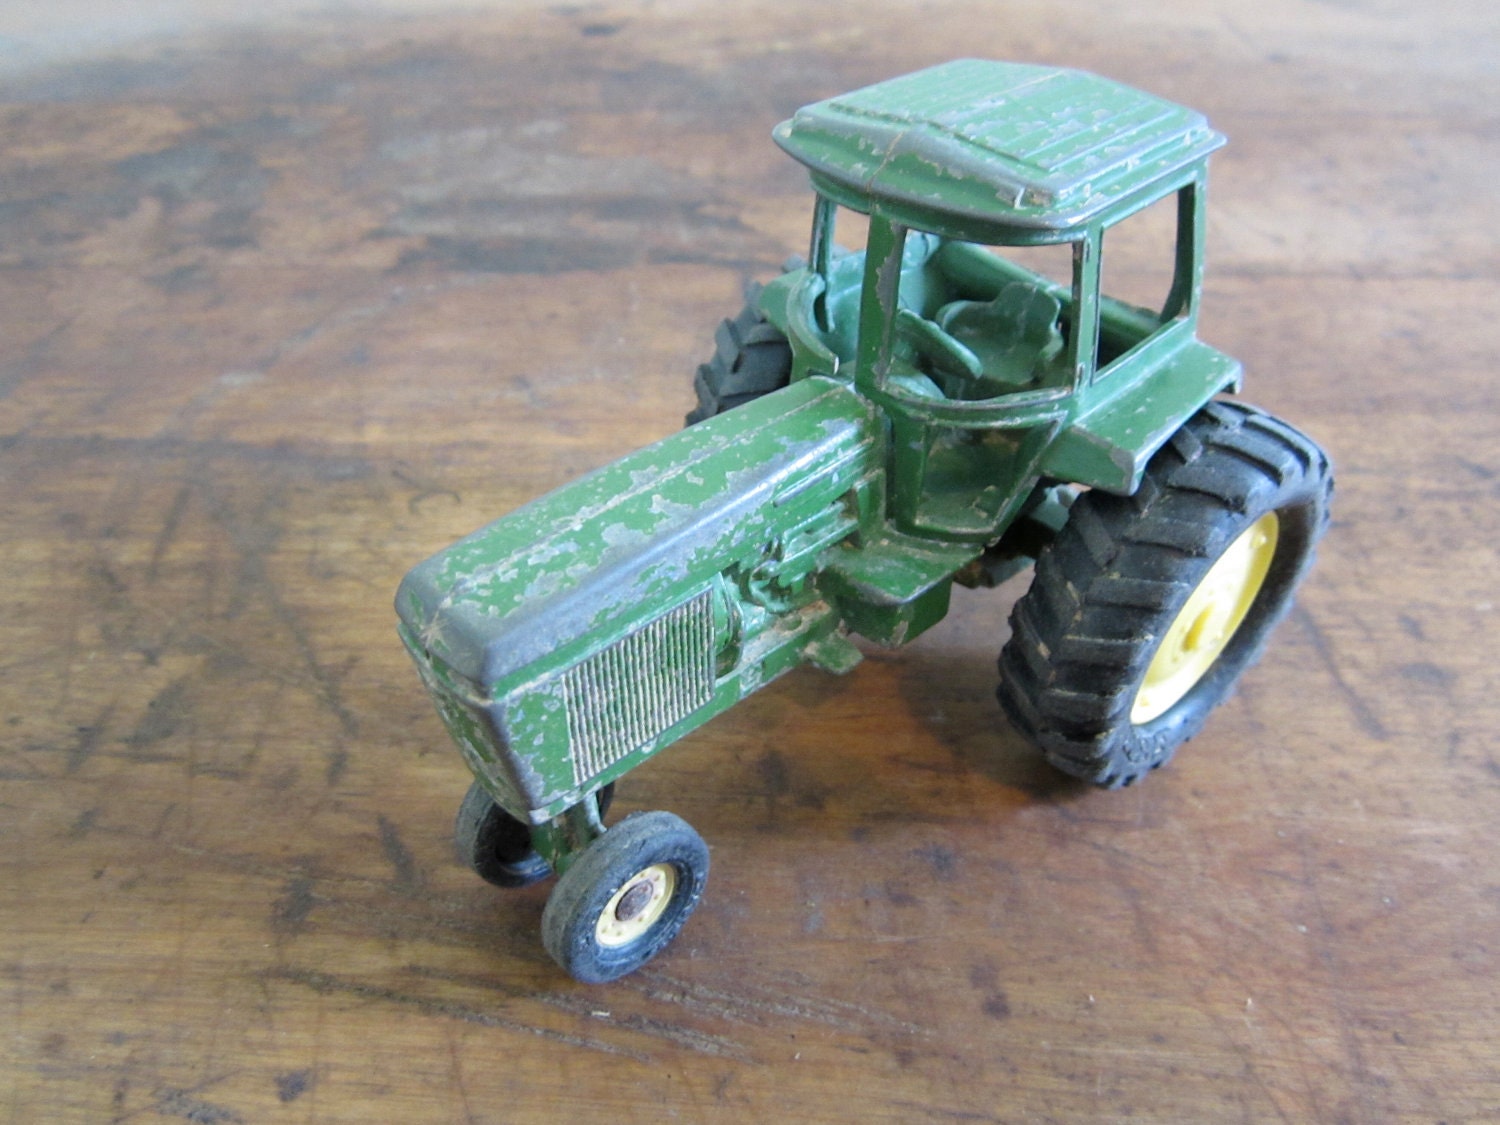 Vintage Metal Toy Tractor John Deere Farm Toy by dproject